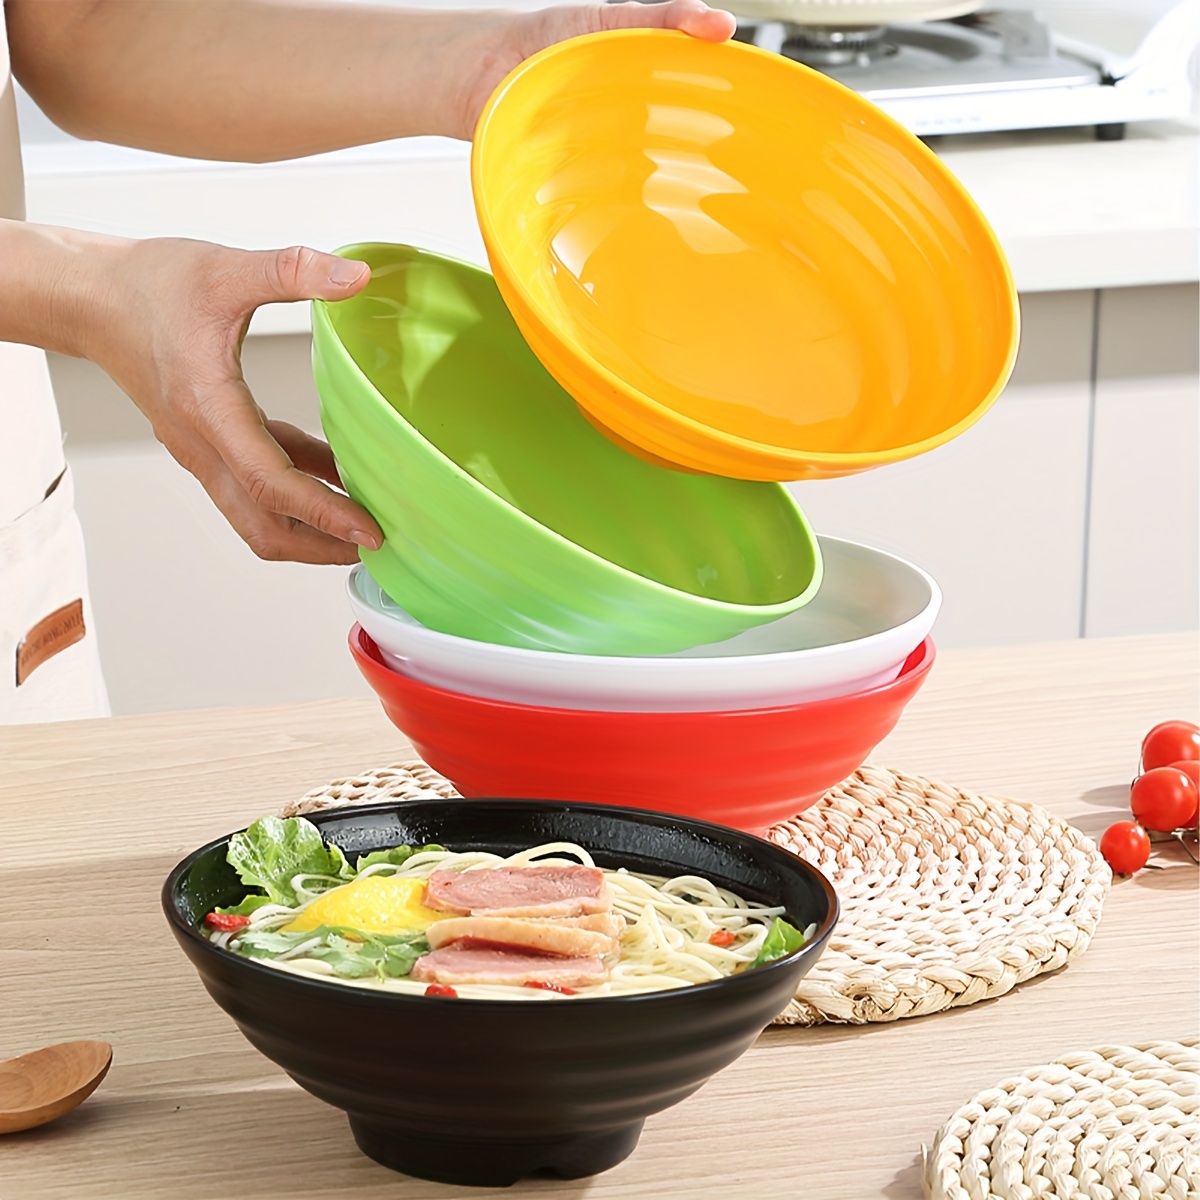 

Japanese Style Black Soup Bowl - 1pc Anti-slip Wave Pattern Ramen Bowl - High-quality Pp Plastic - Round Rice Bowl For Dining And Outdoor Use